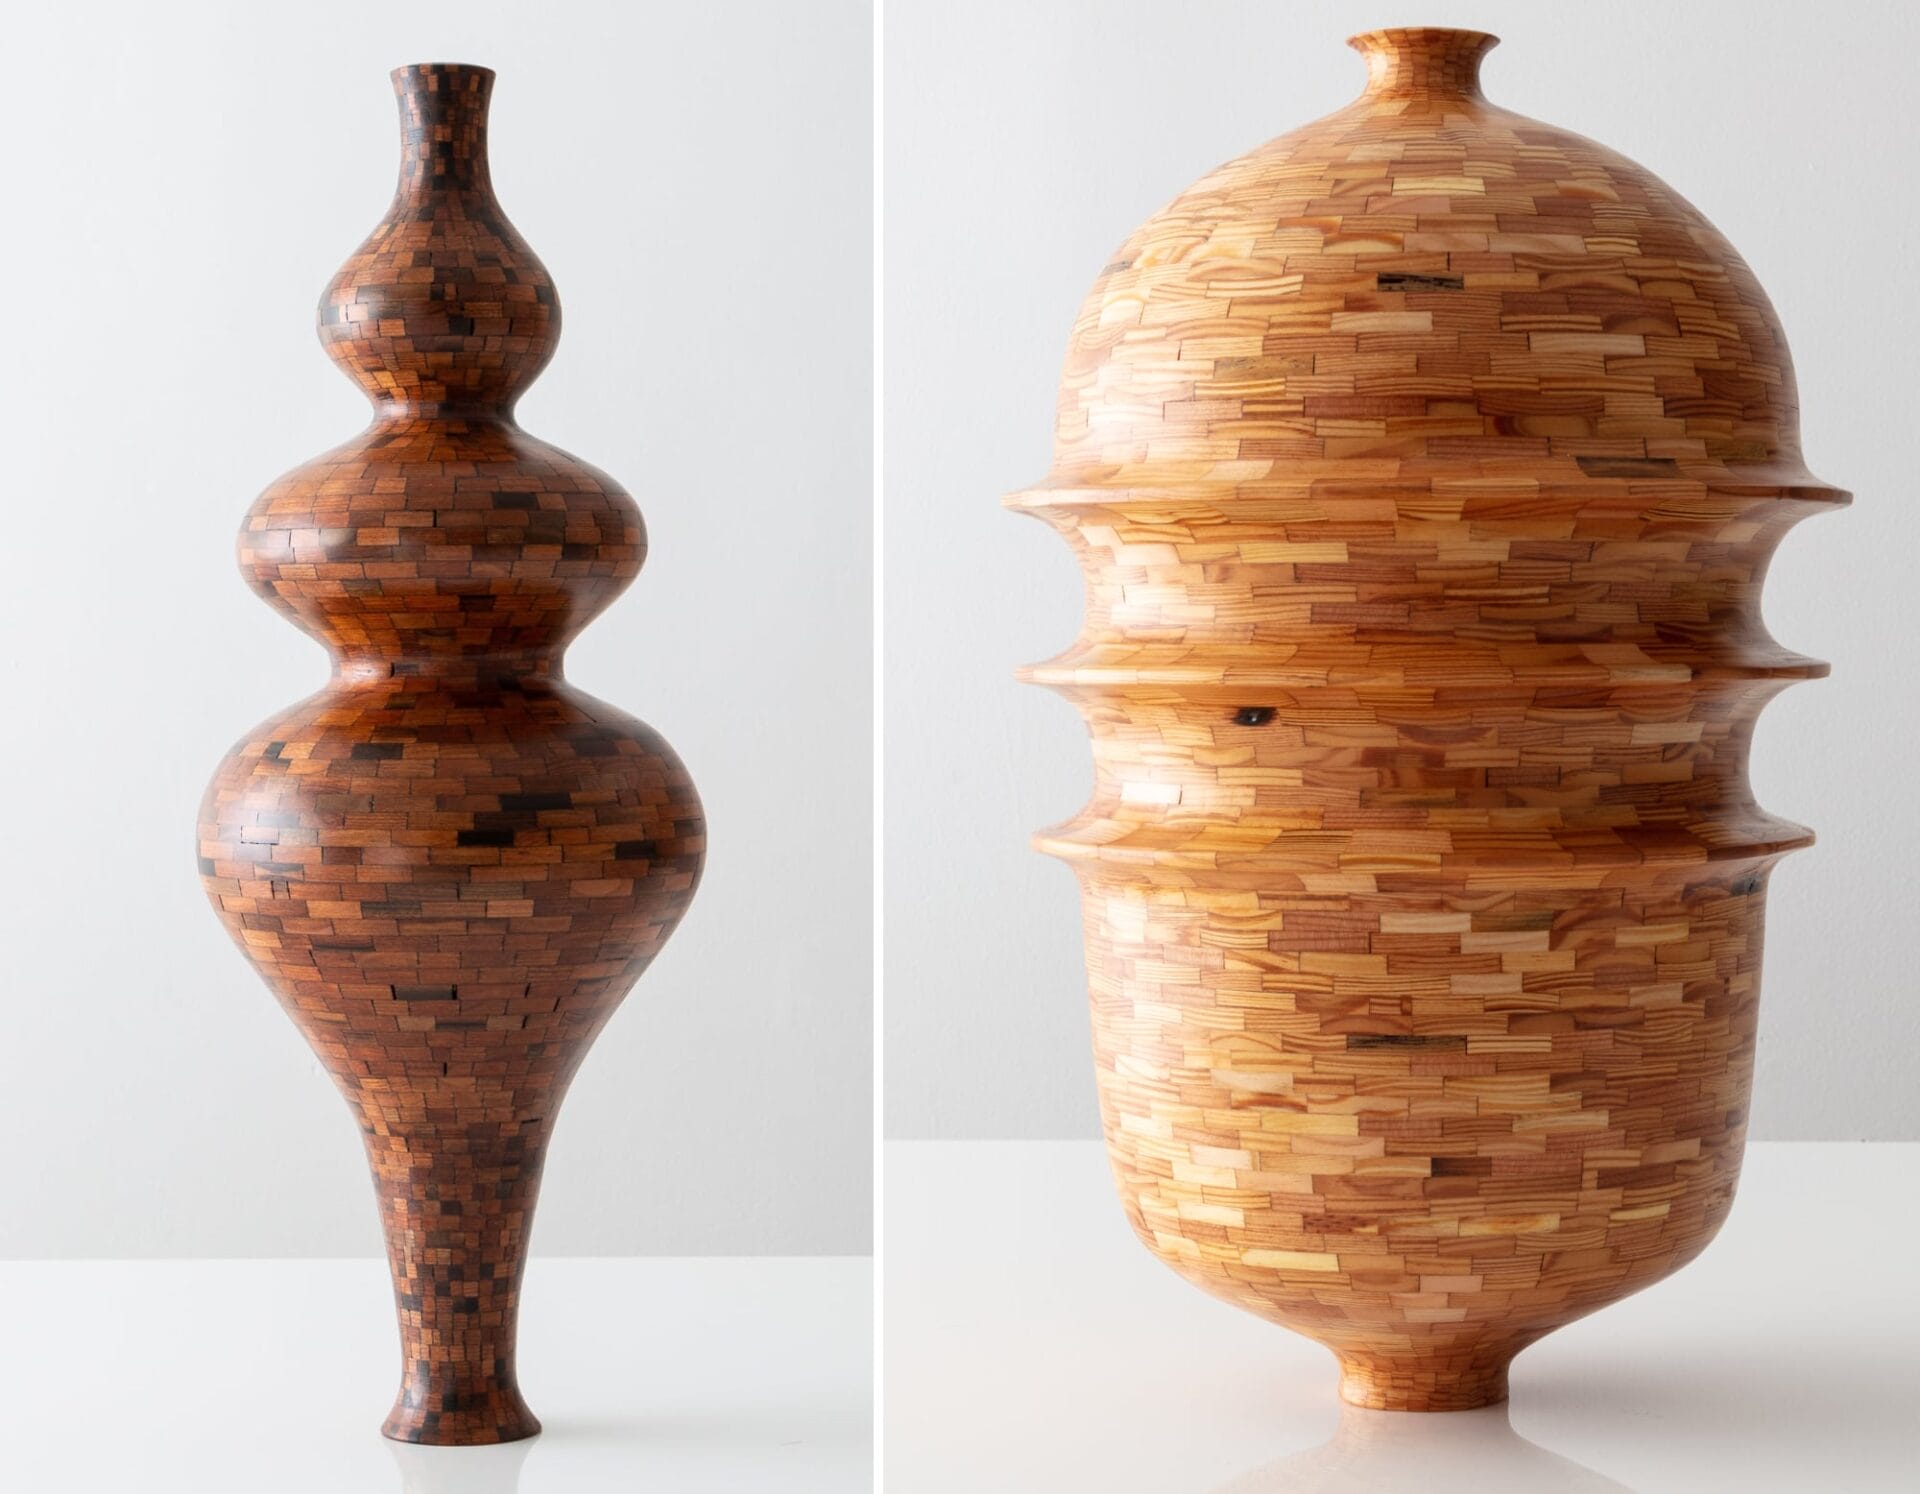 two curvy wooden vessels made of dark and light wood components fitted together